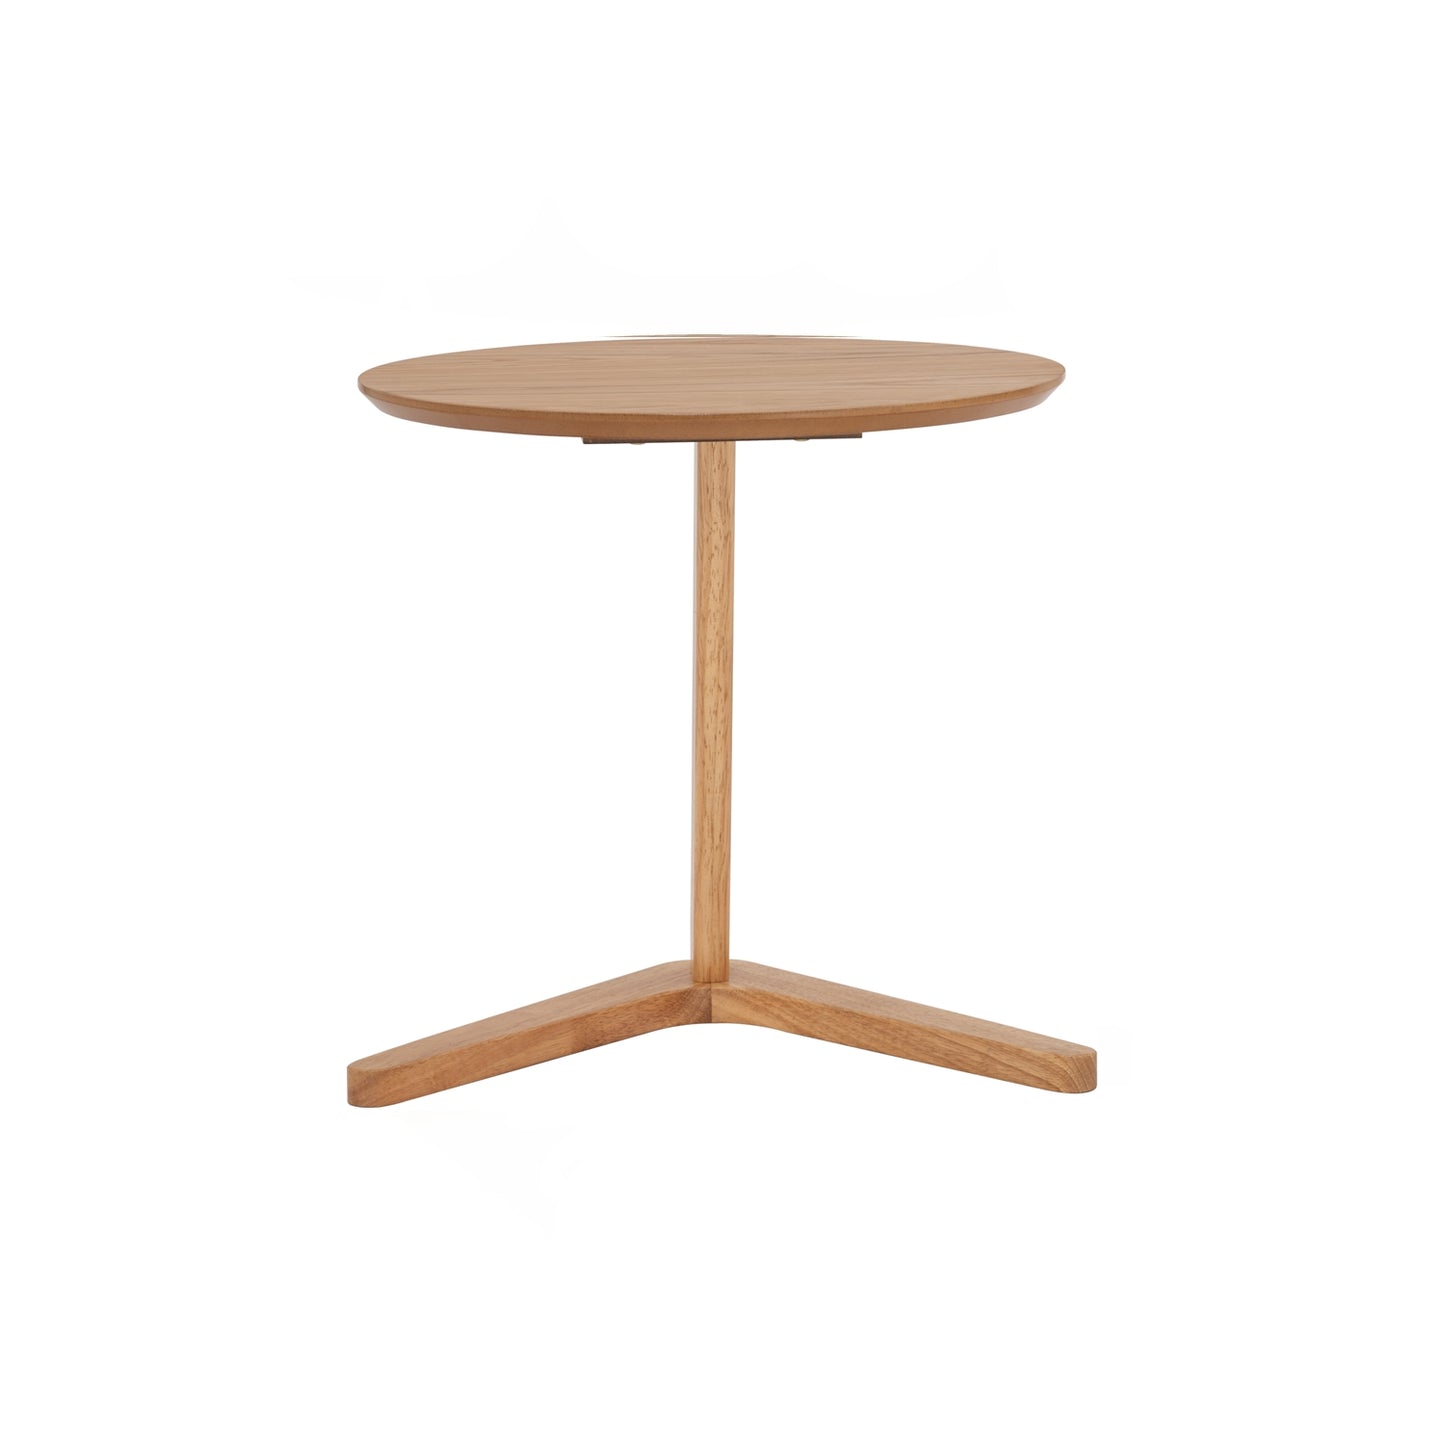 TRIS ROUND COFFEE TABLE  Bege color